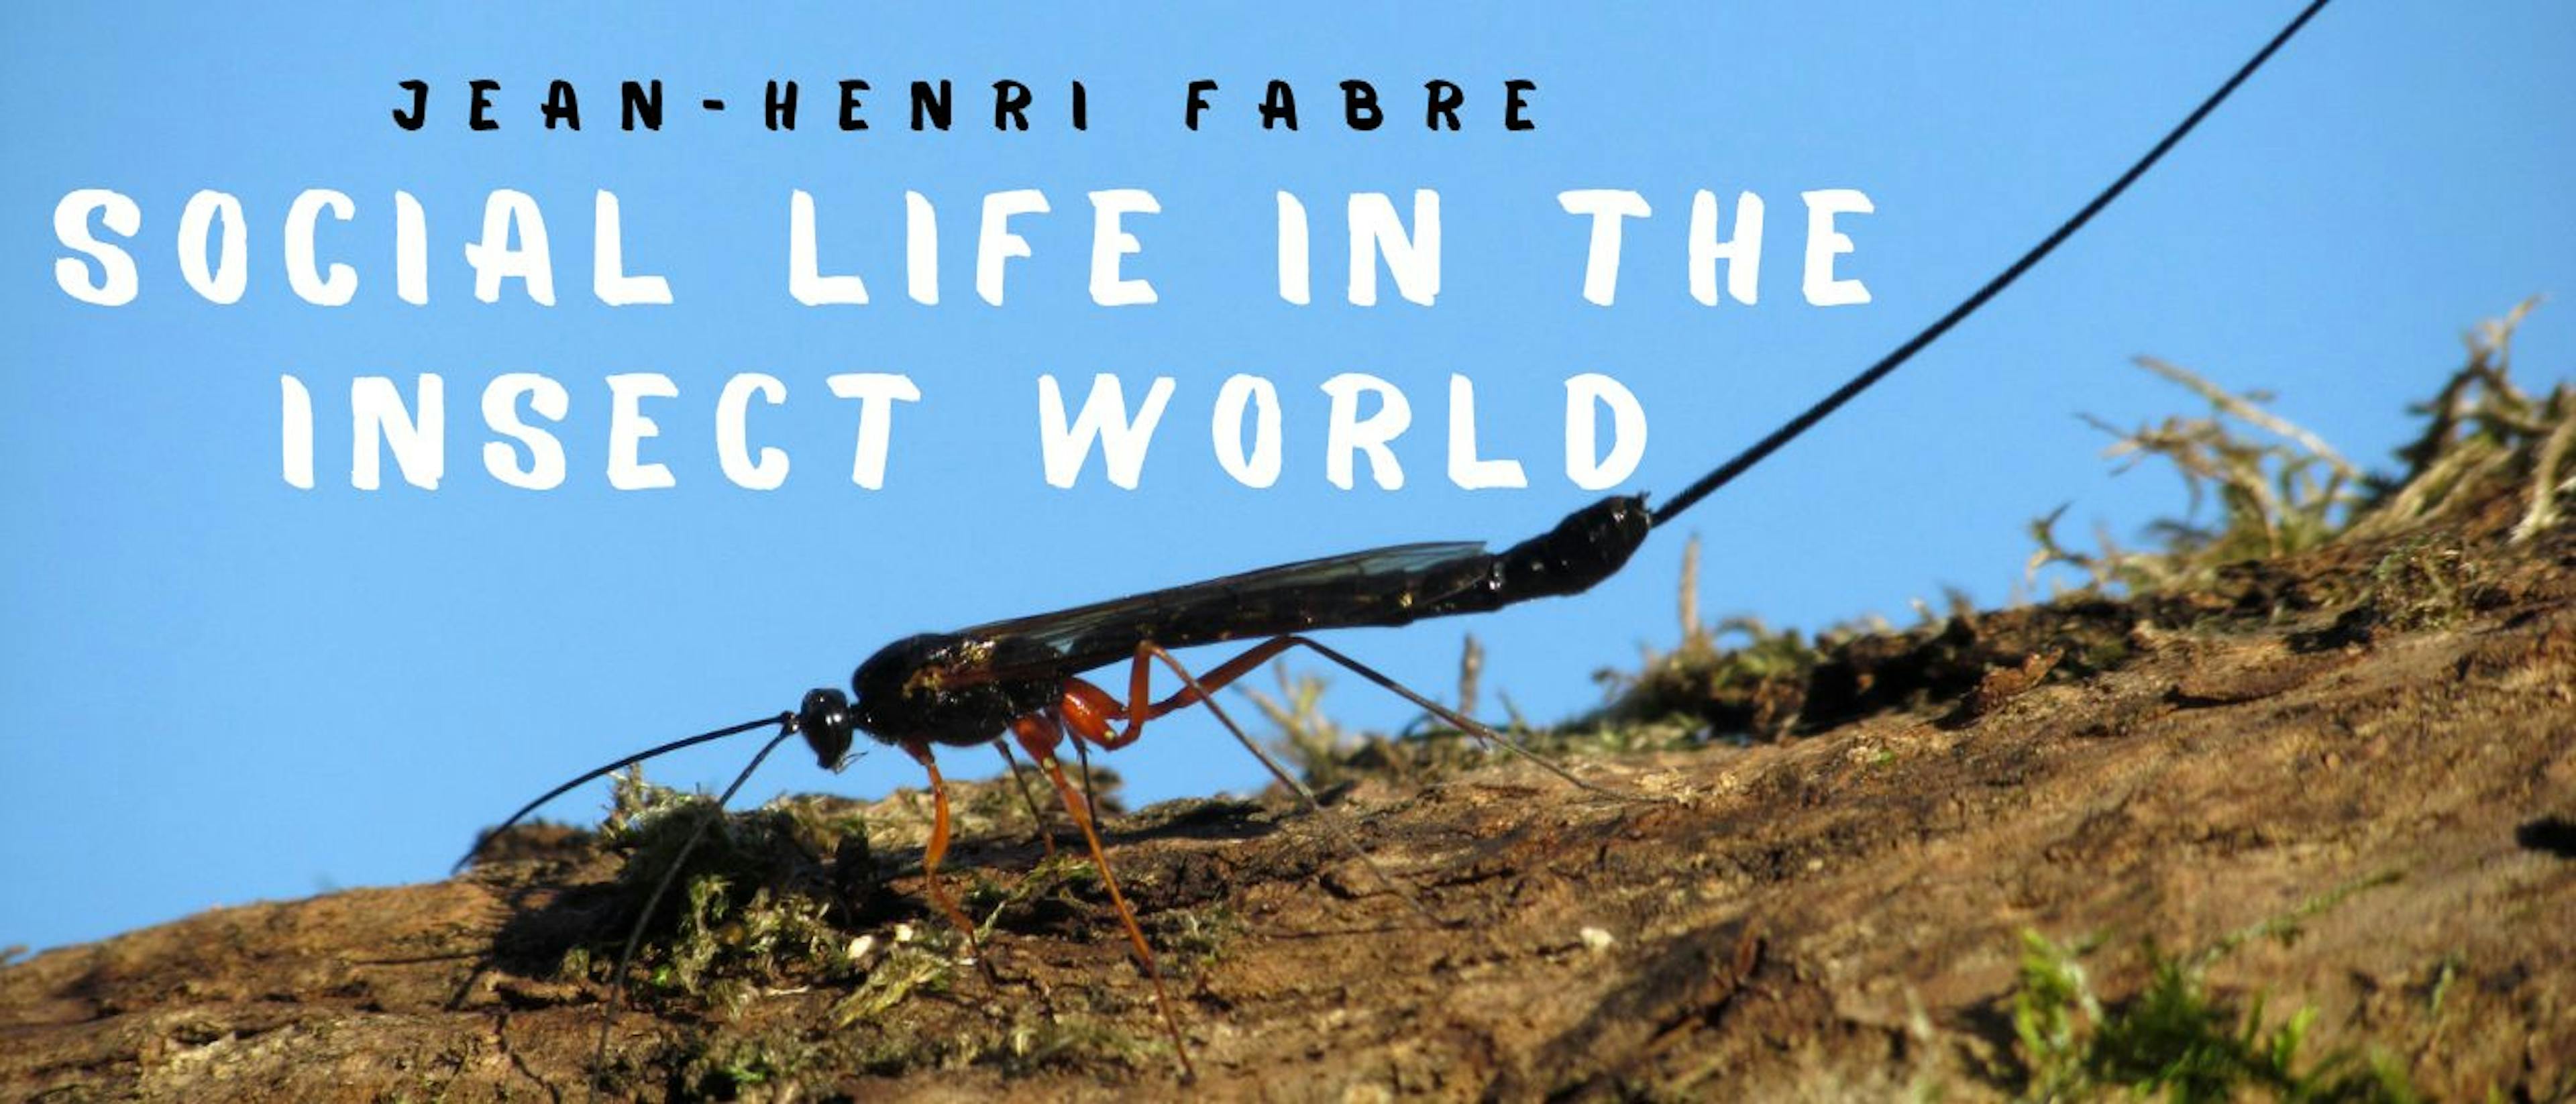 featured image - Social Life in the Insect World by Jean-Henri Fabre - Table of Links